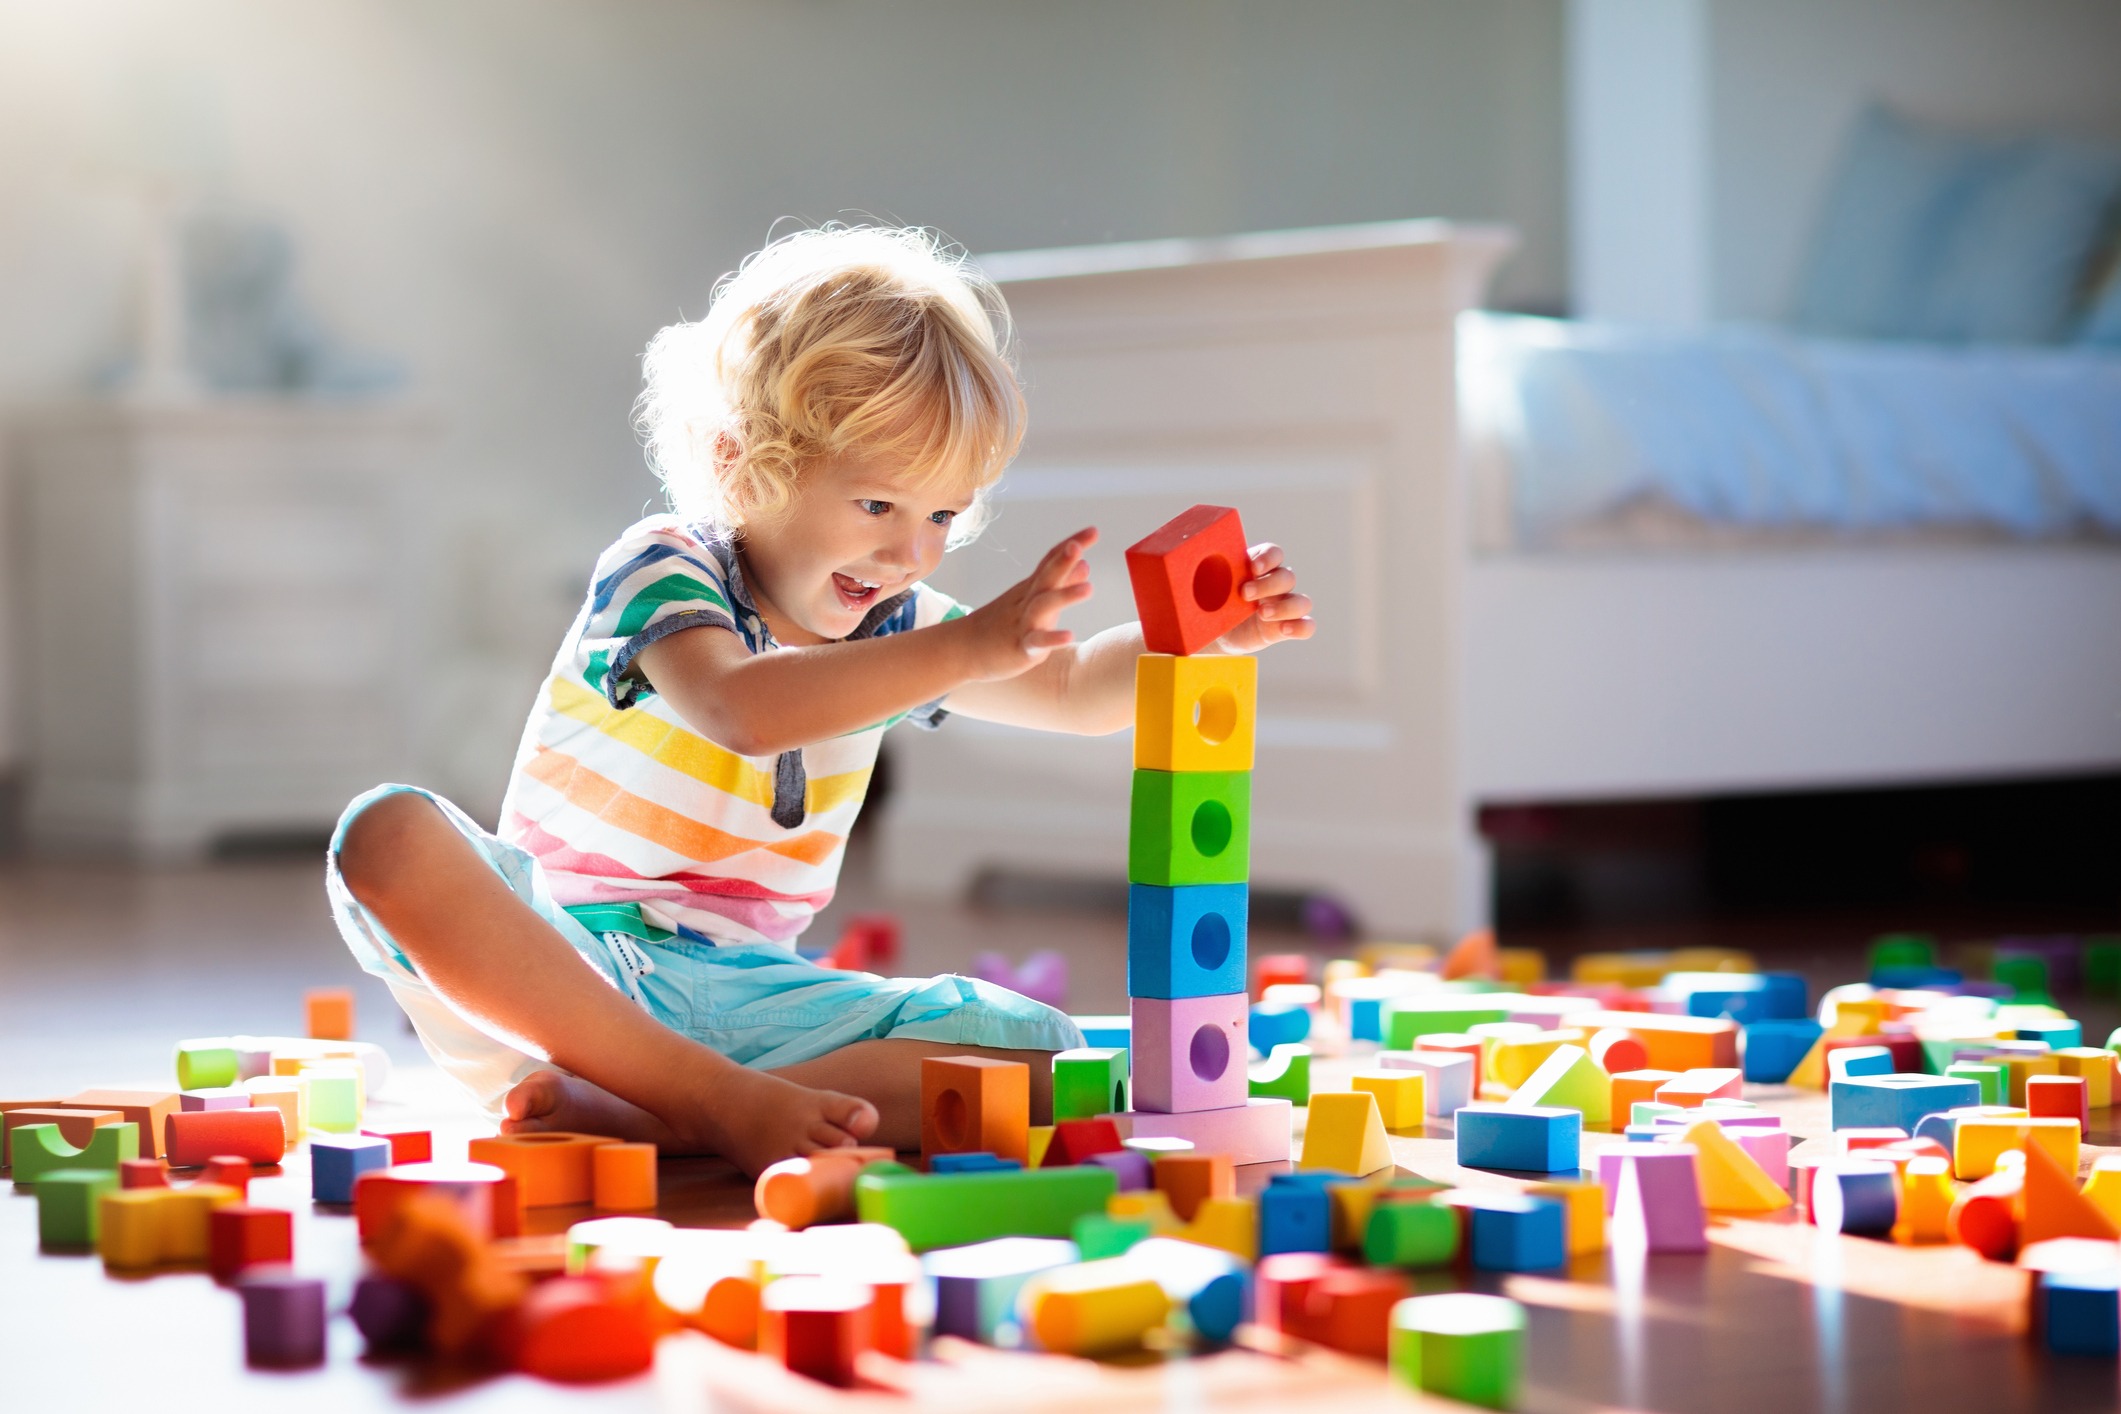 child-playing-with-colorful-toy-blocks image